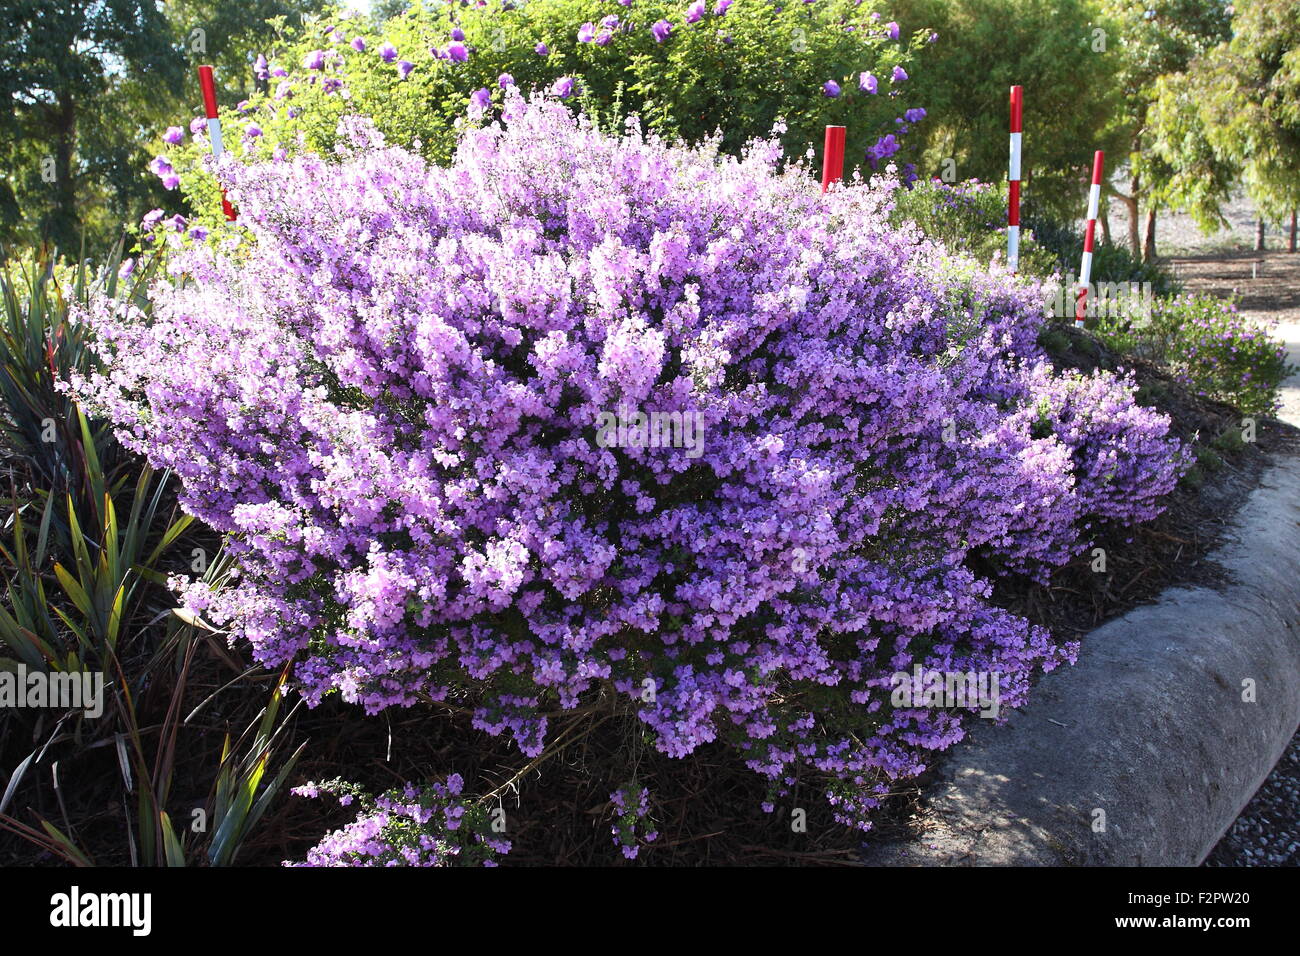 Prostanthera incisa or known as Mint fresh Stock Photo